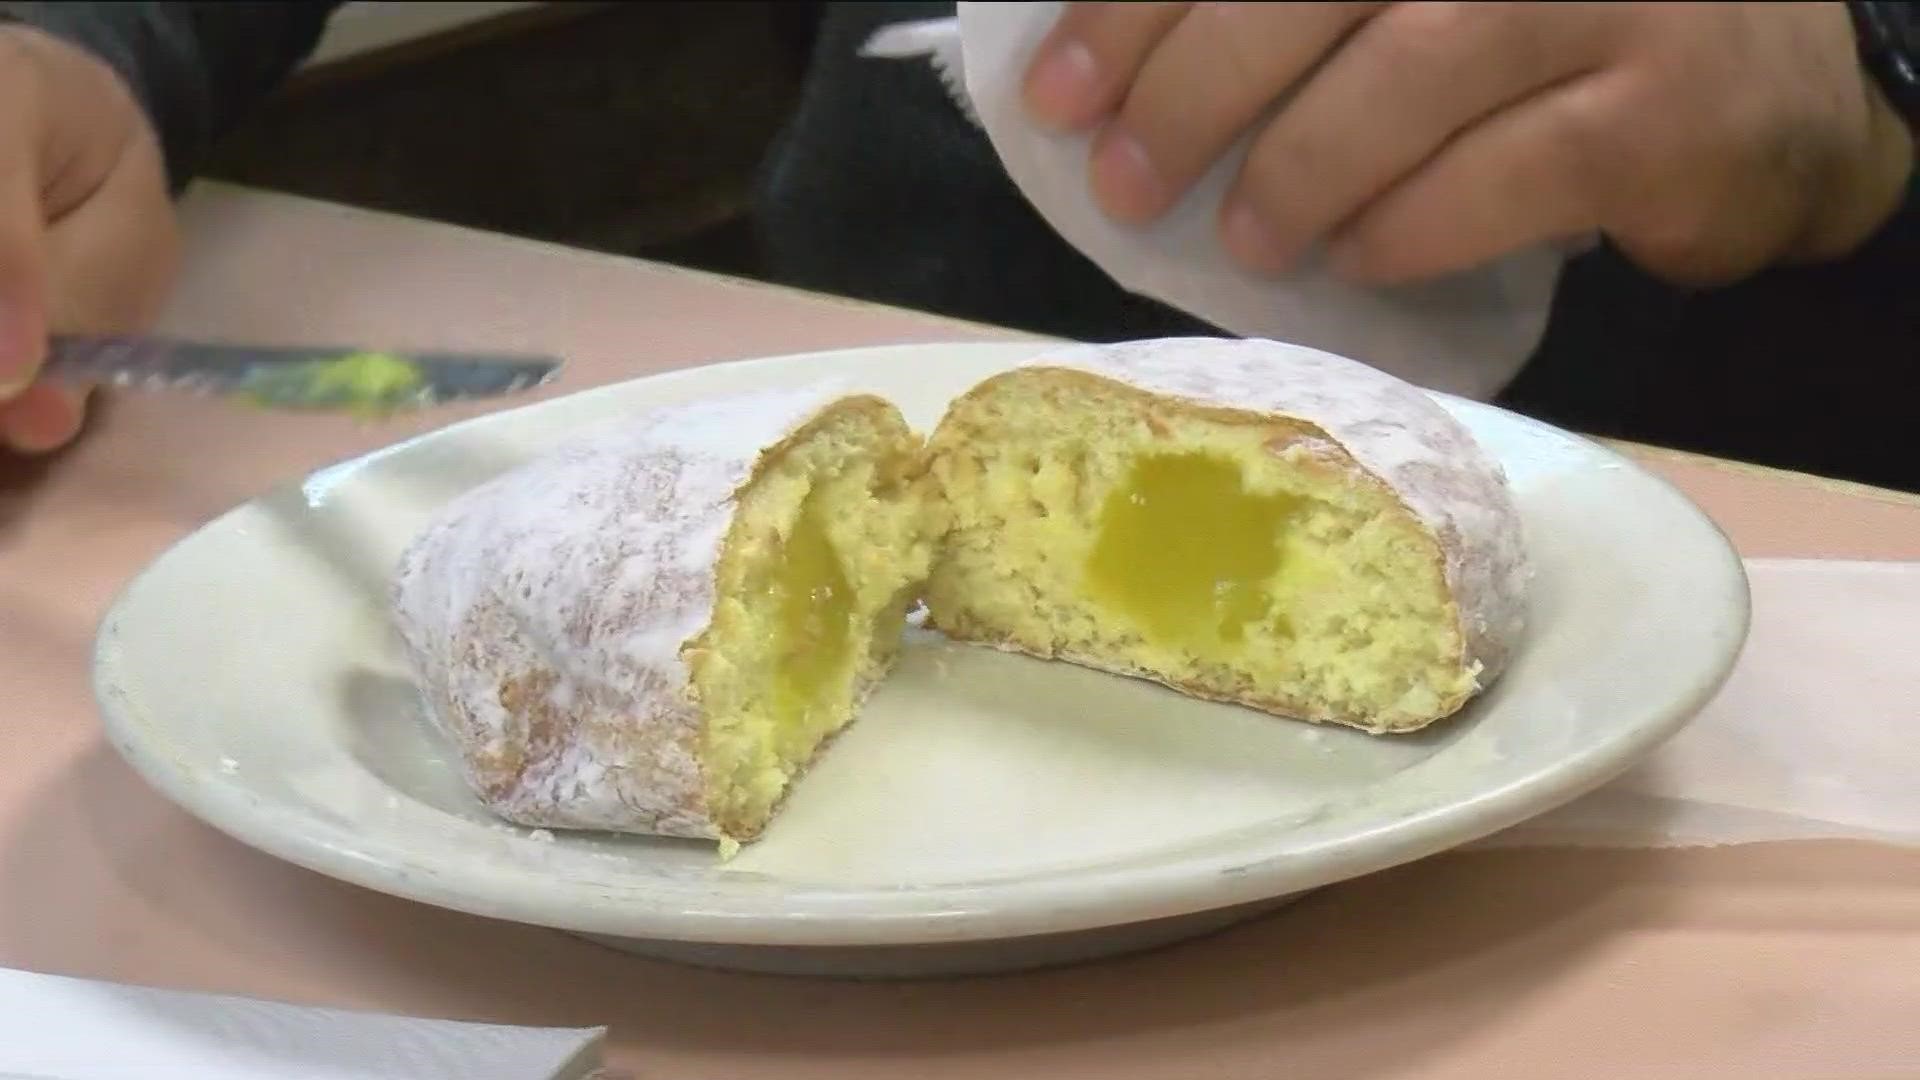 Local bakers are making paczki in celebration of Fat Tuesday.